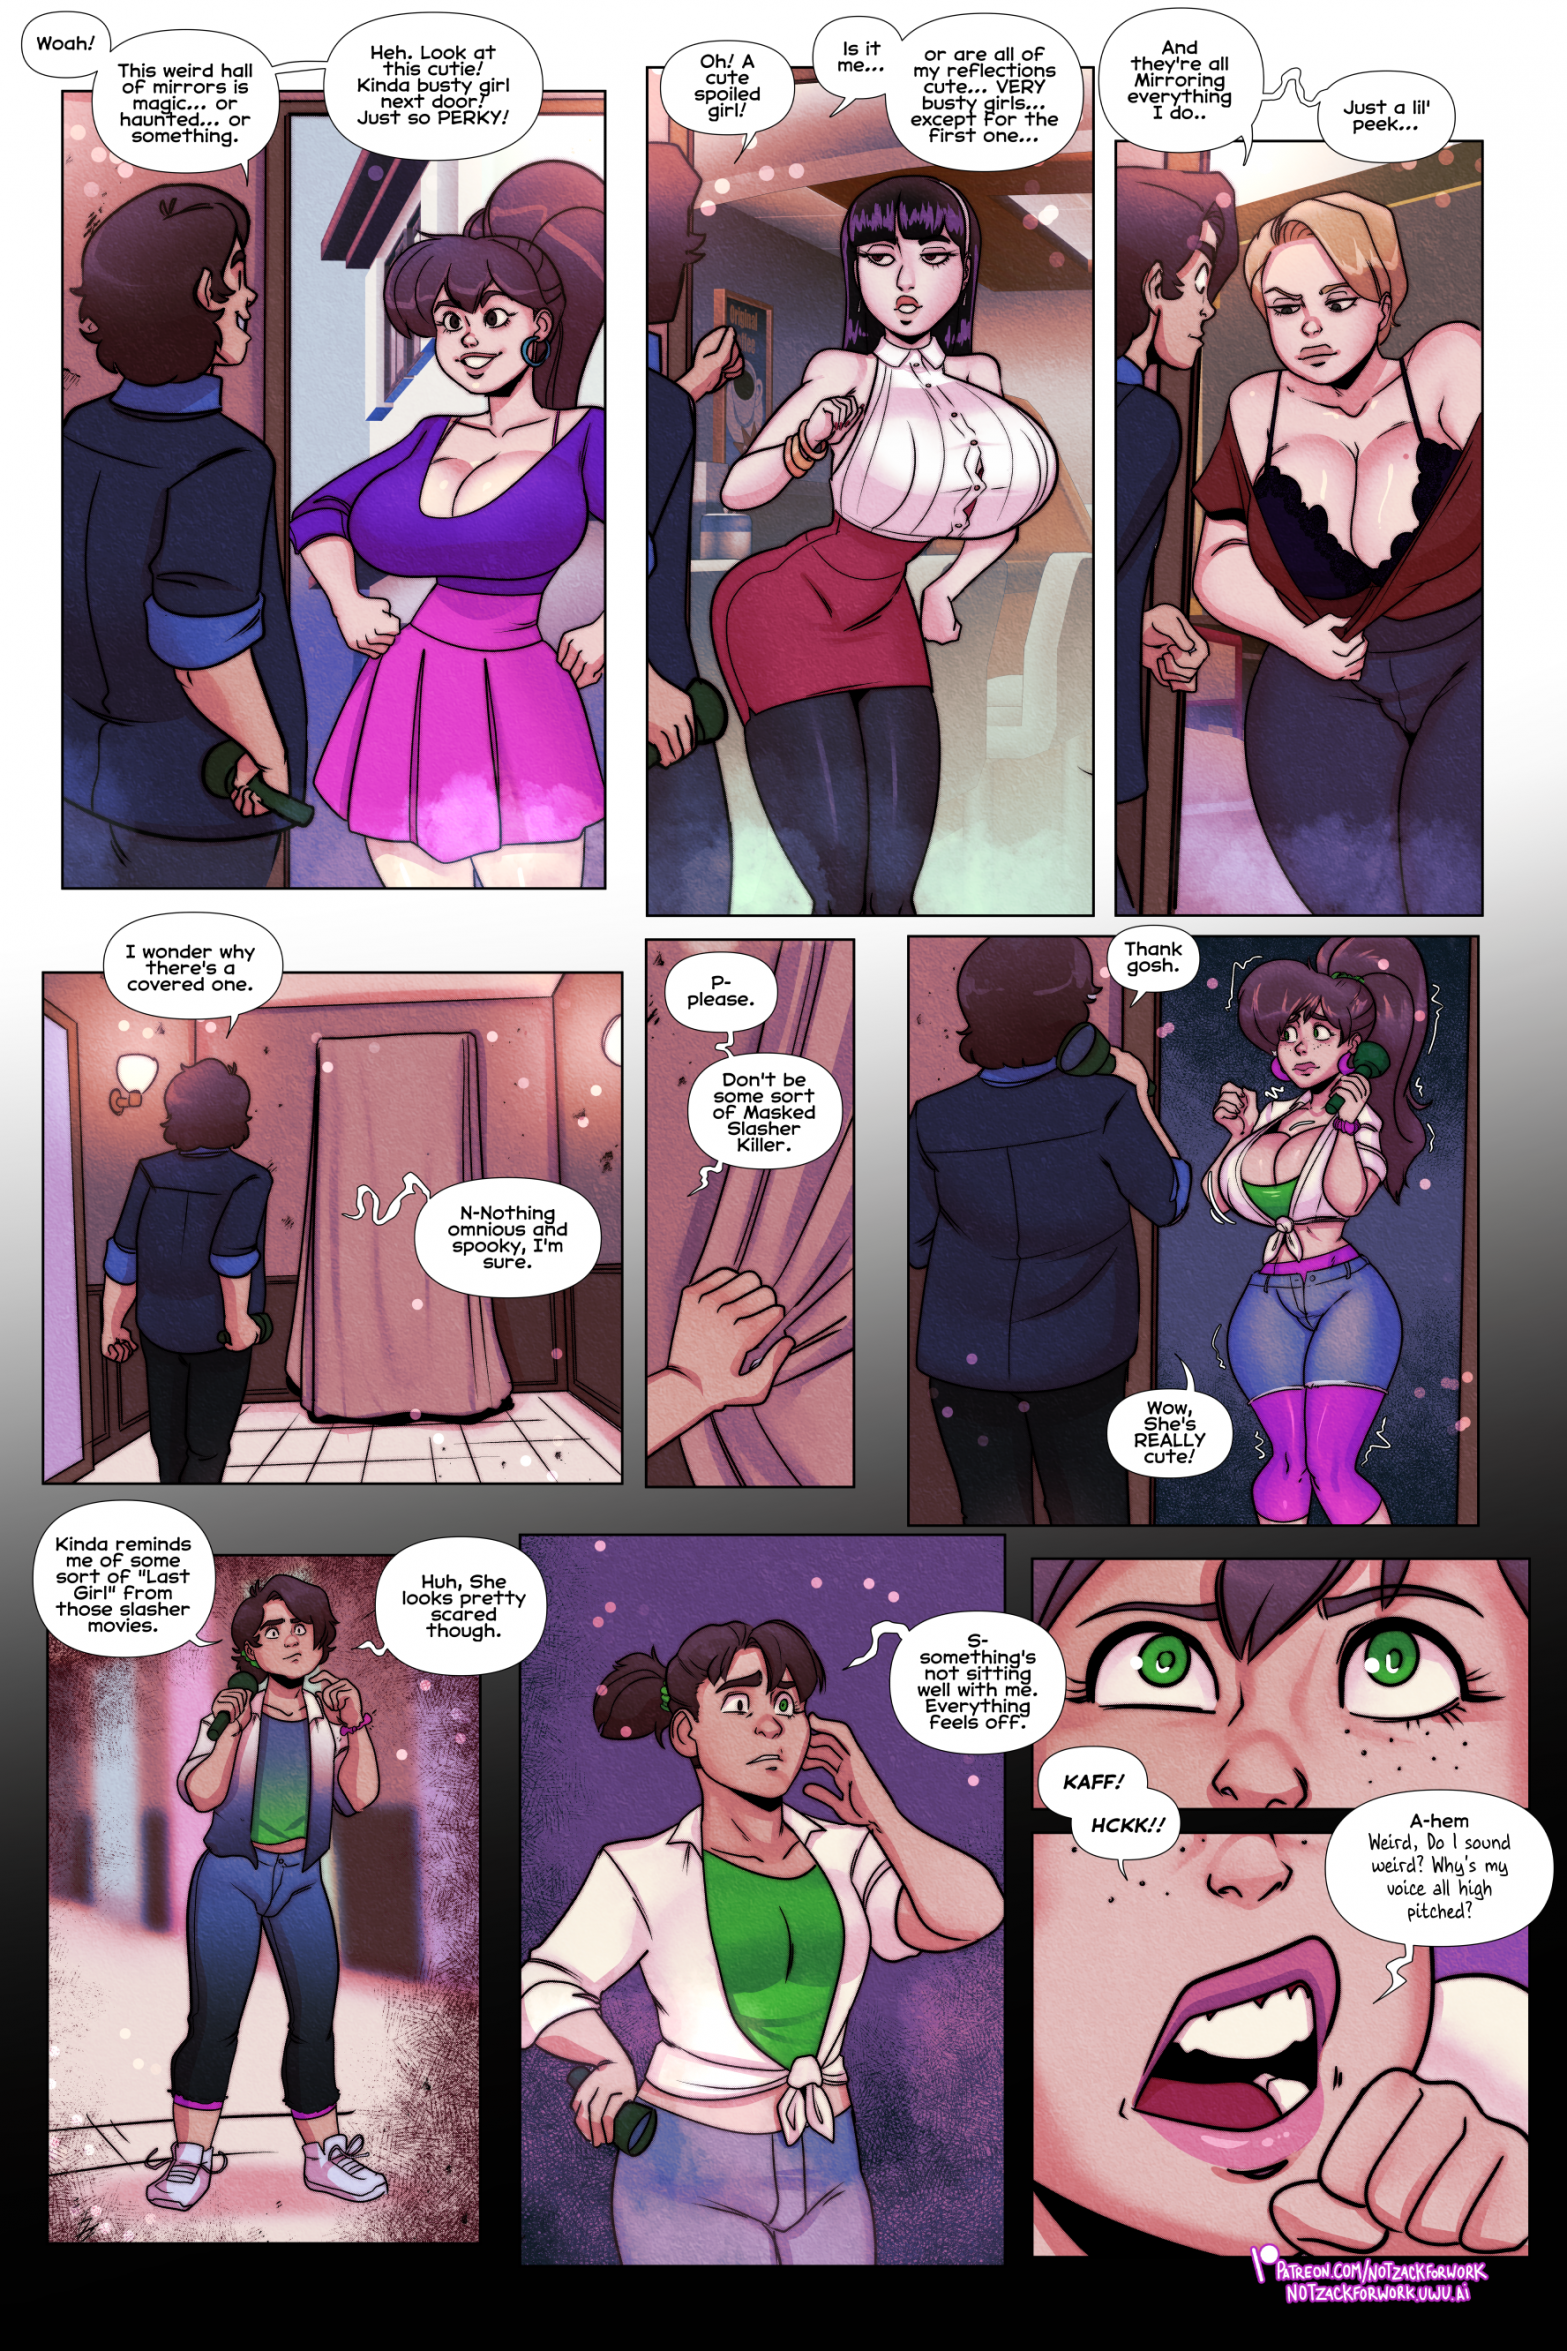 Lift and Separate Page 2 Preview by notzackforwork on Newgrounds